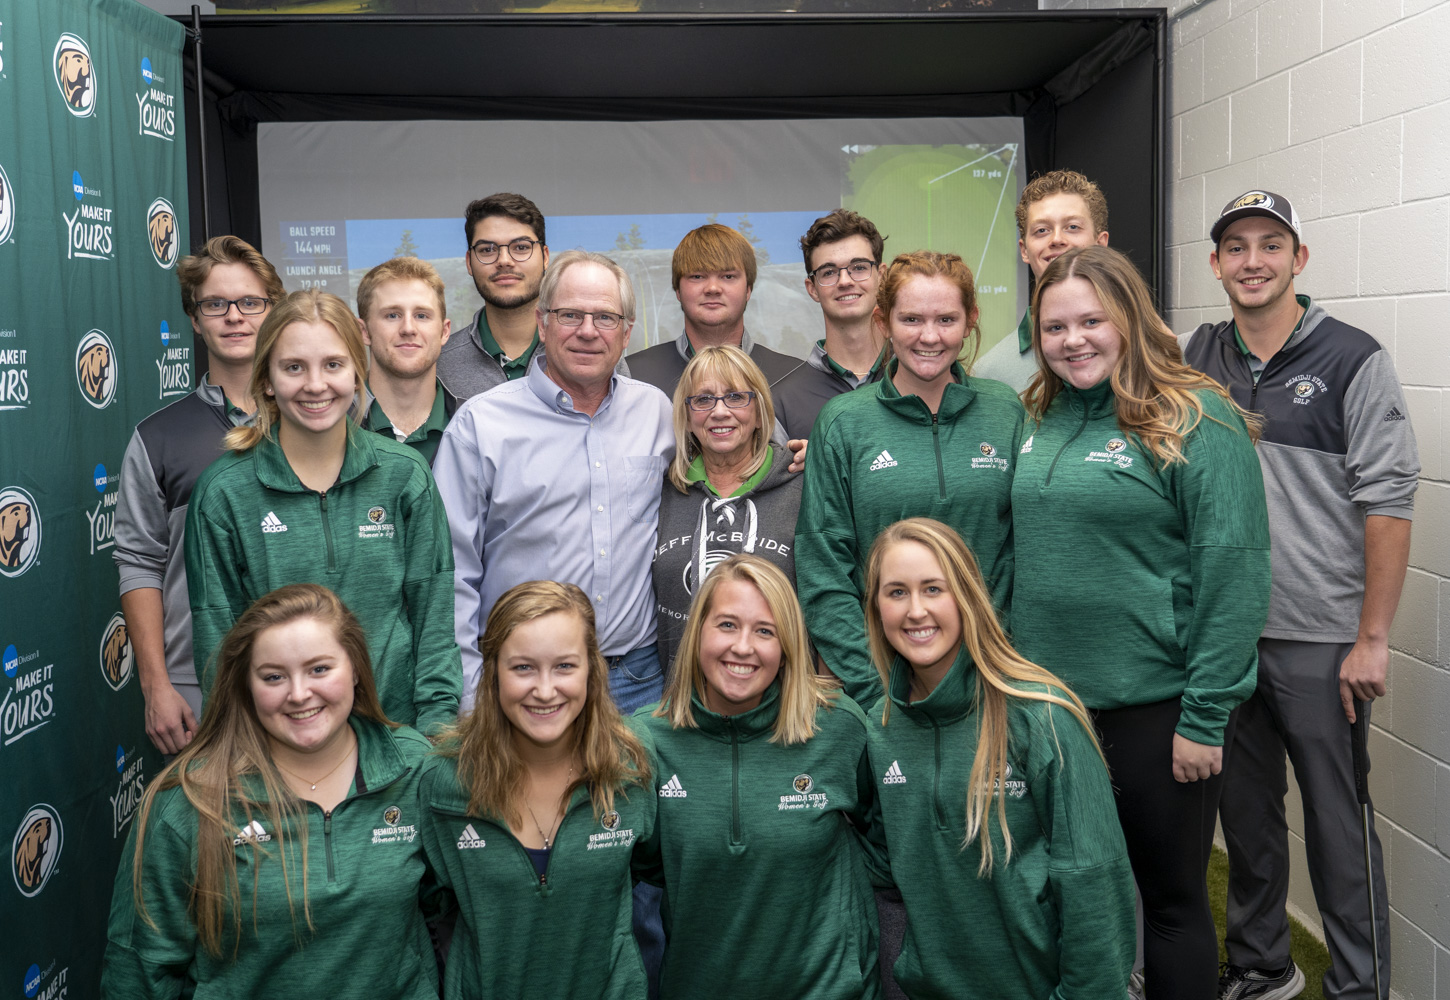 BSU golf teams pose with Gary and Ruth McBride at the dedication of the Jeff “Bird” McBride Clubhouse on Nov. 2